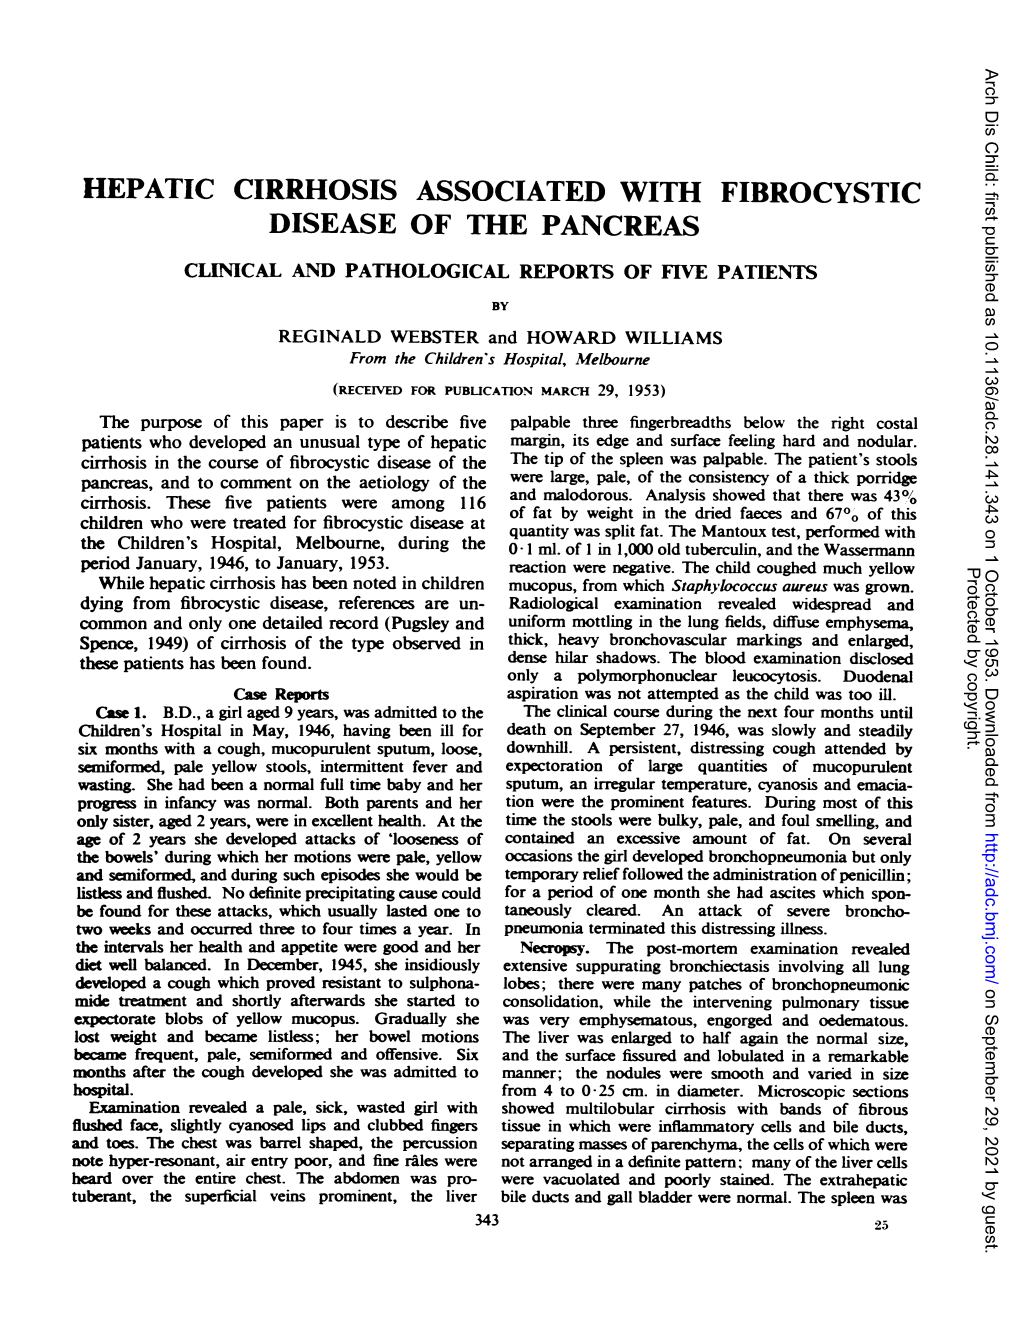 Hepatic Cirrhosis Associated with Fibrocystic Disease of the Pancreas Clinical and Pathological Reports of Five Patients